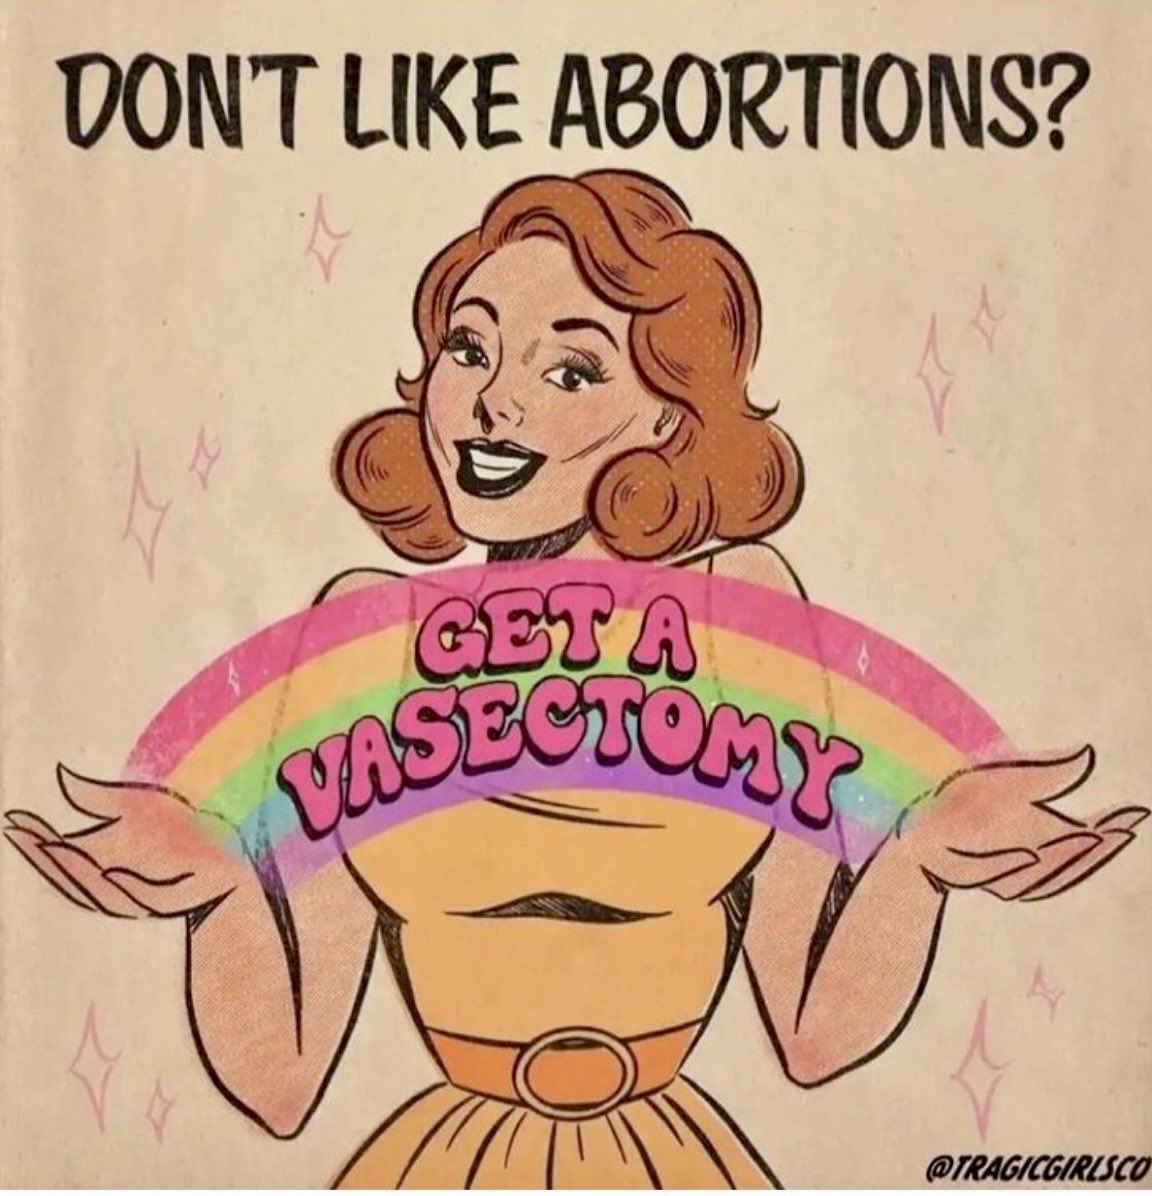 Don’t like abortions ⁉️